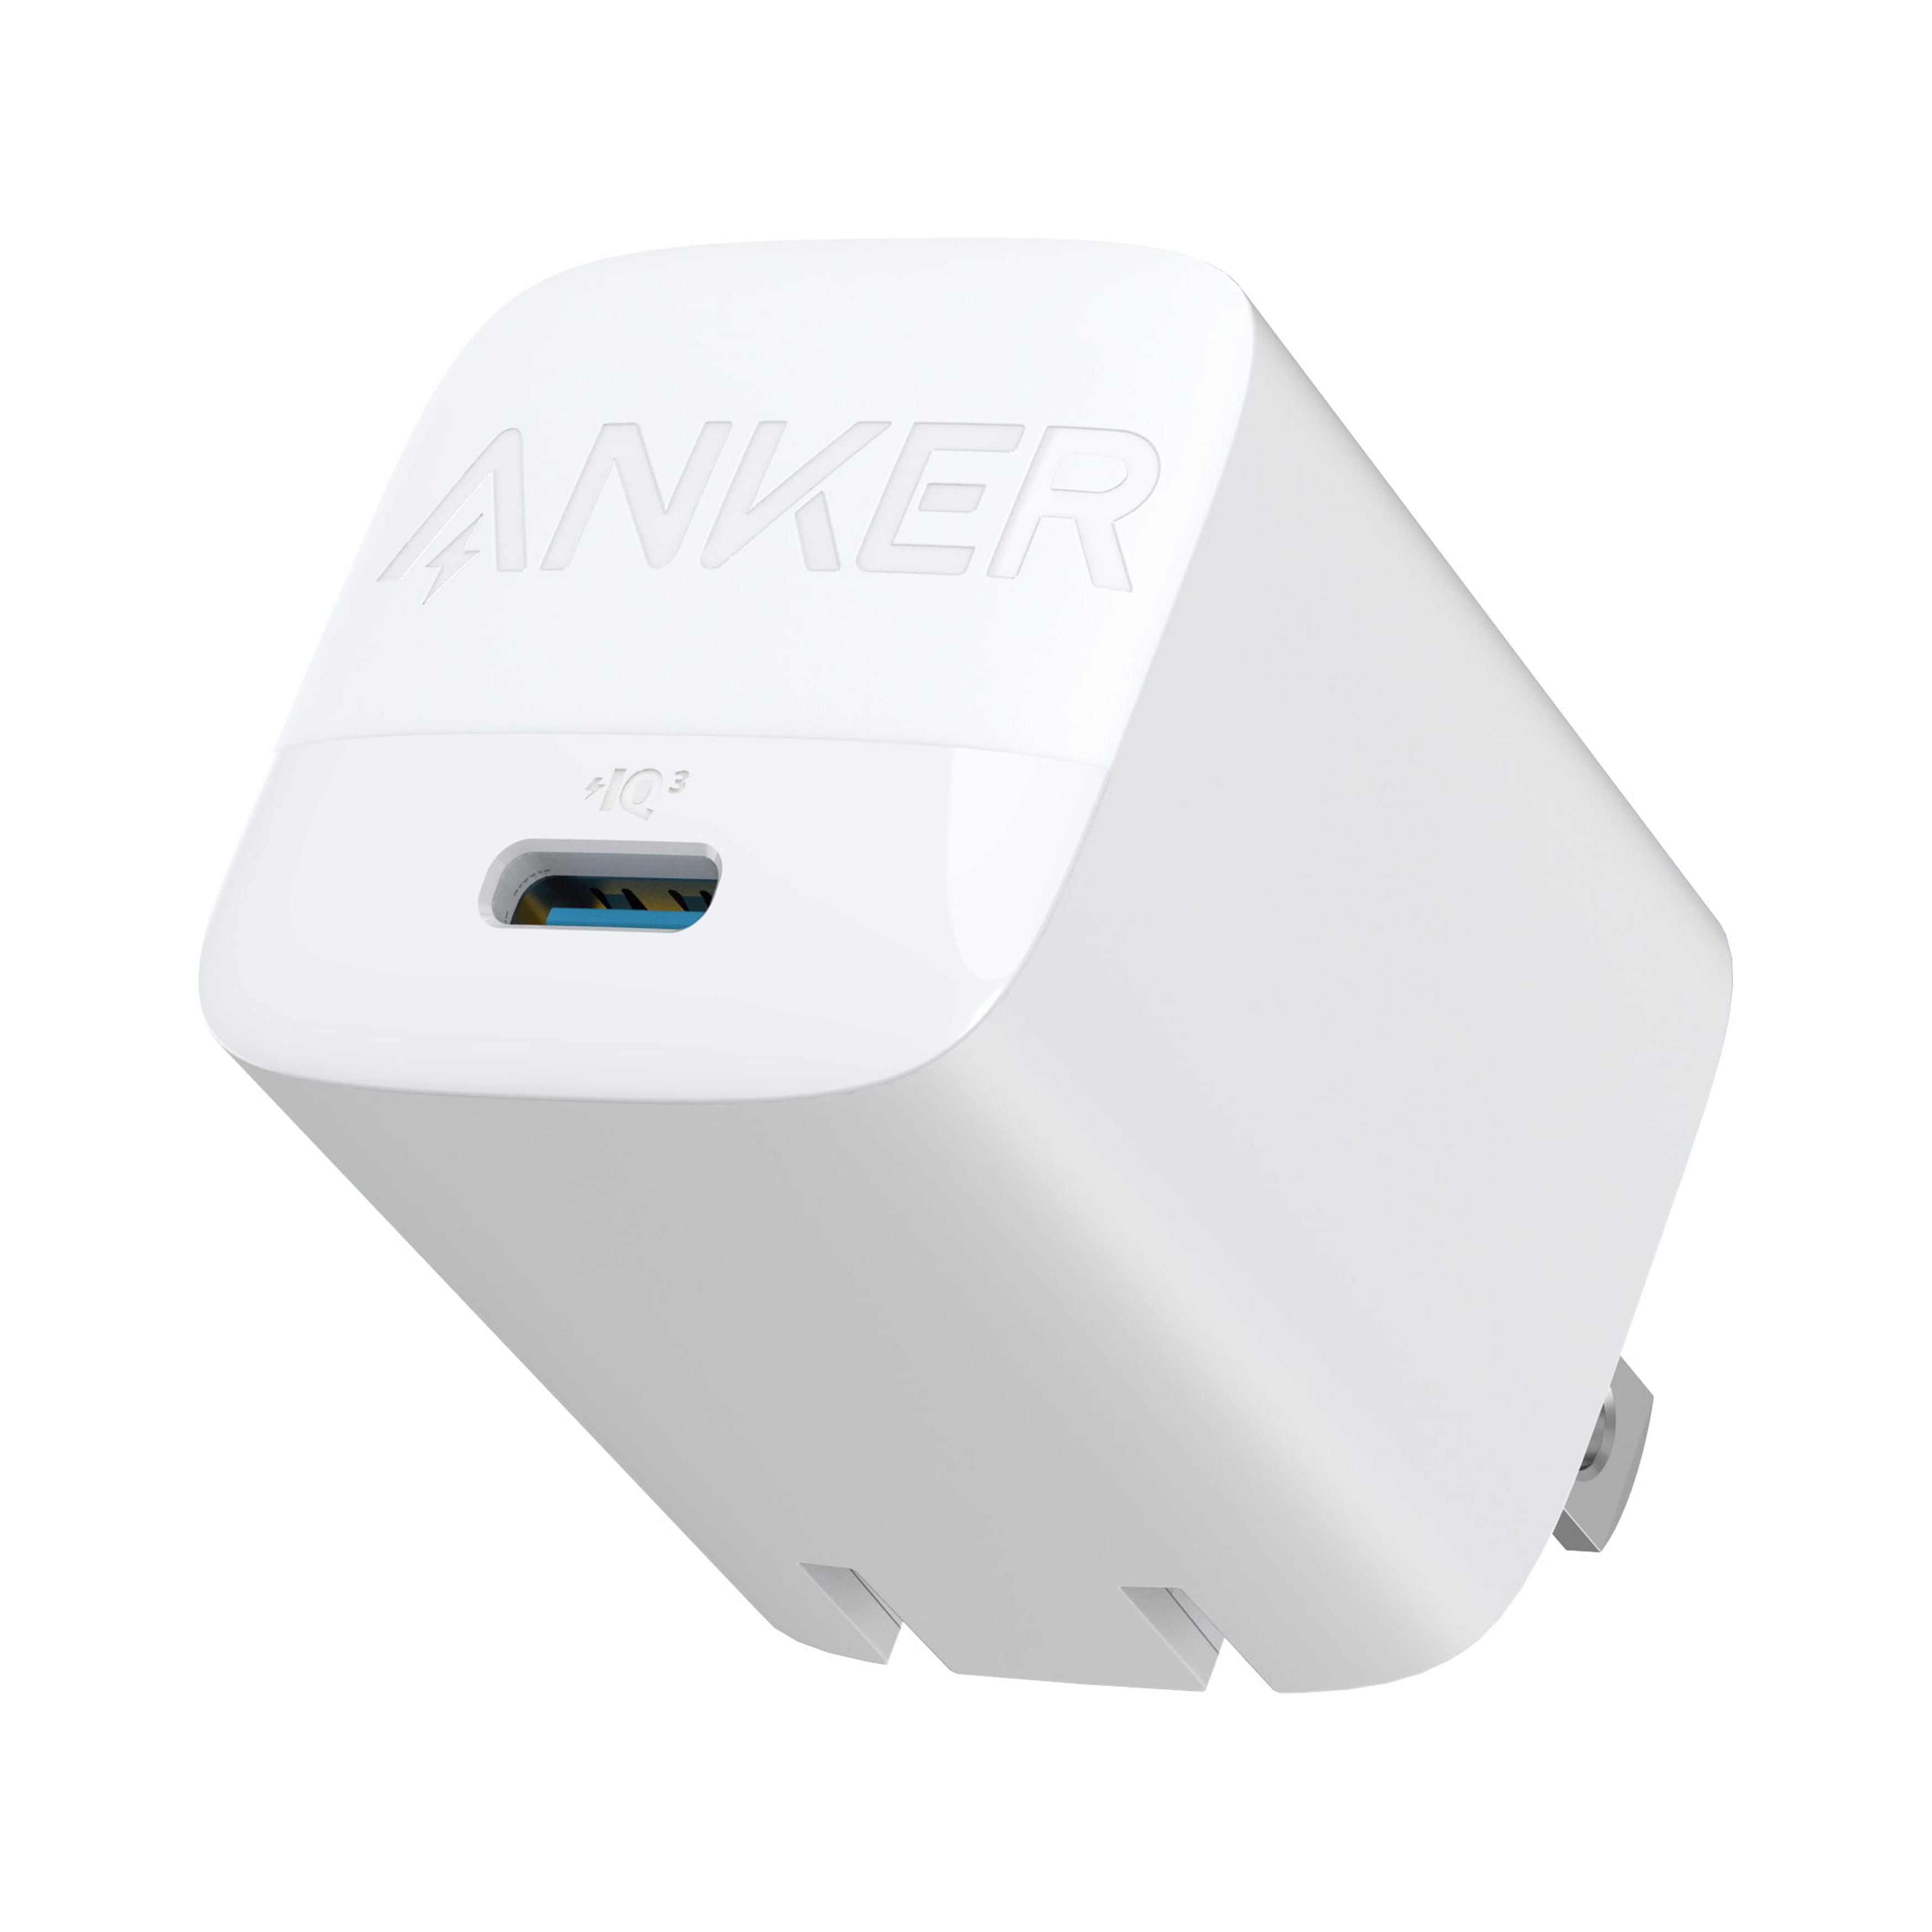 Anker 717 Charger (140W) - Anker US